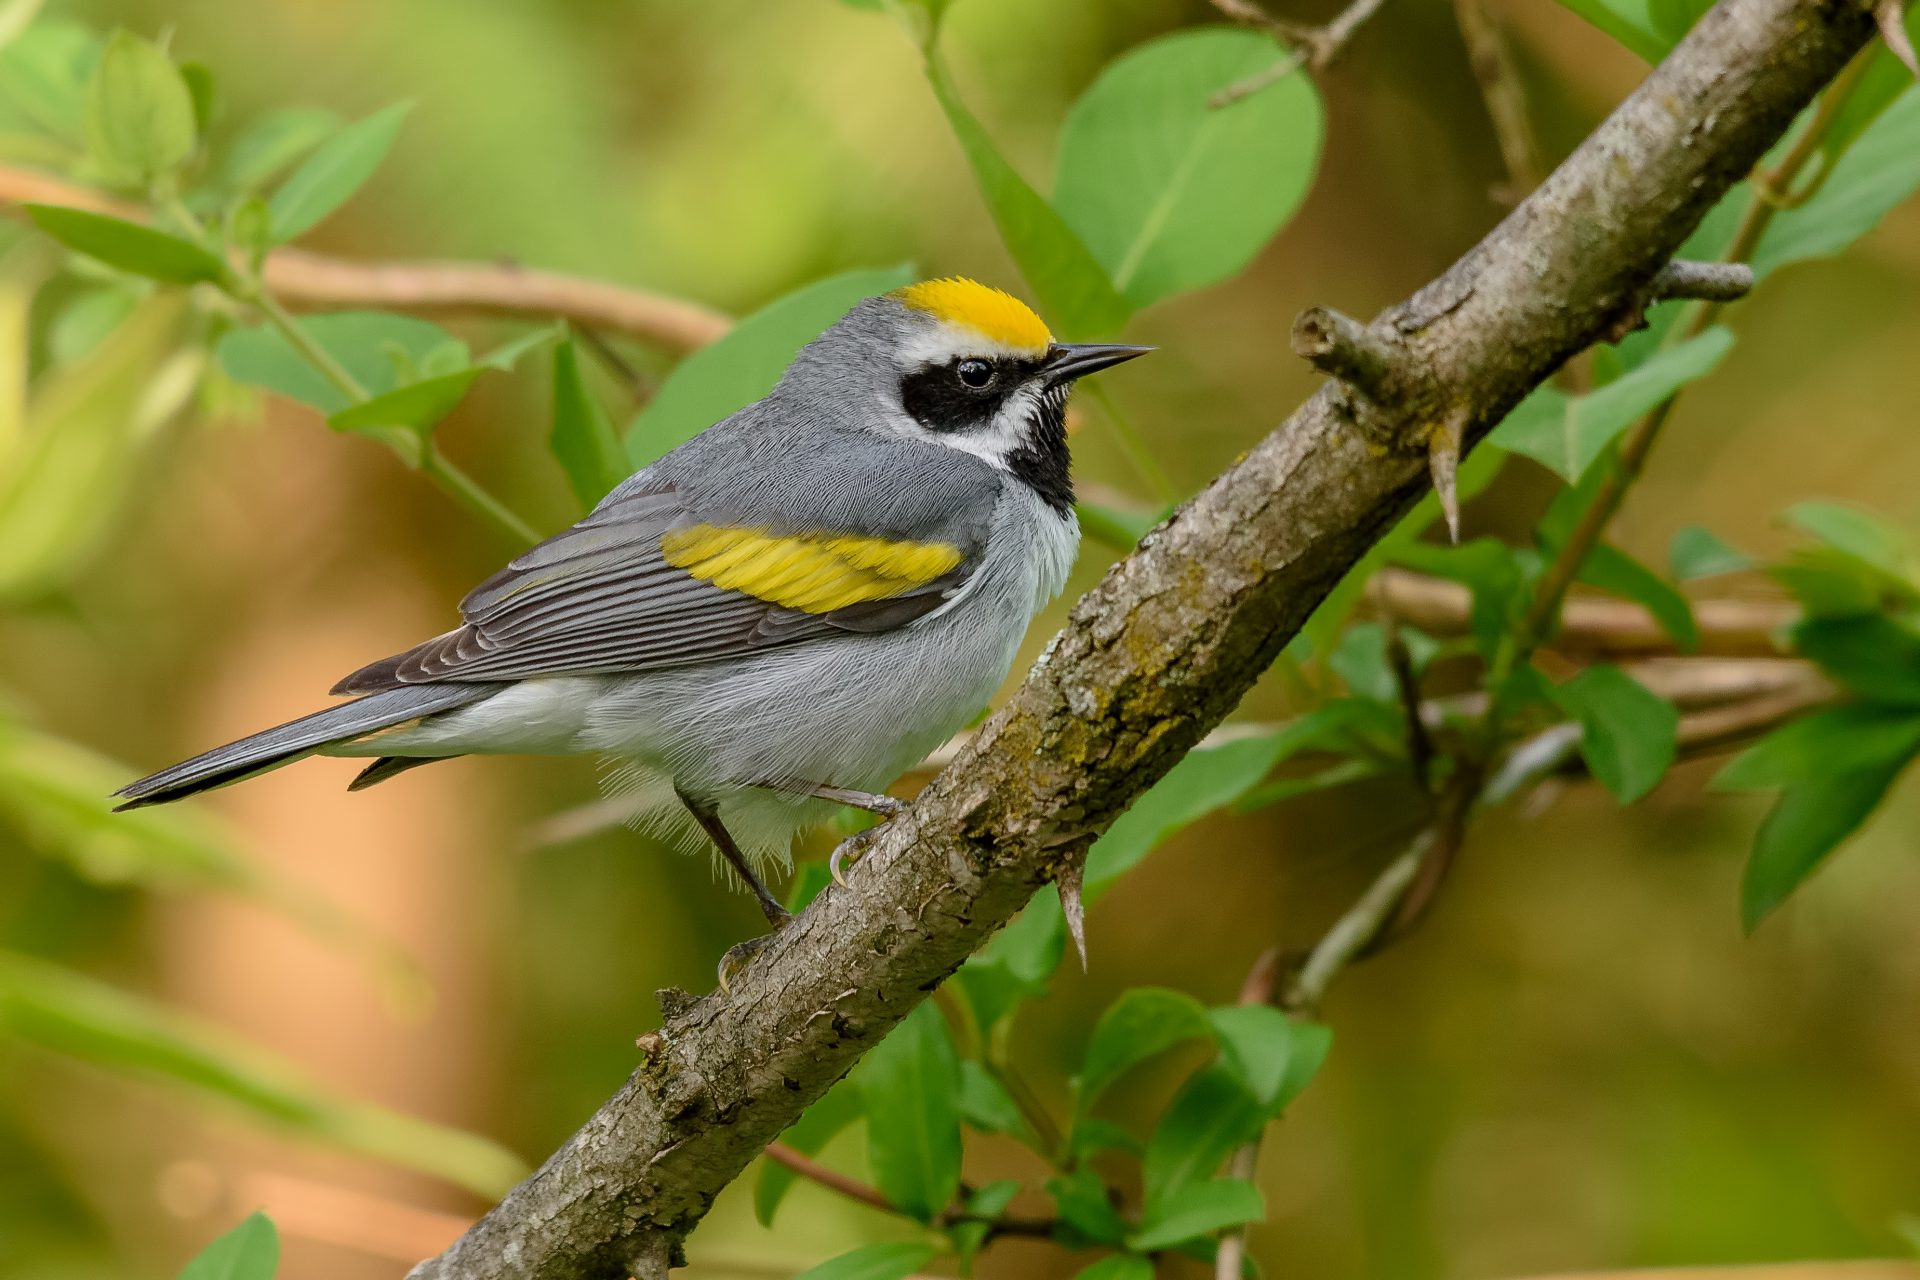 A study with Golden-winged warblers